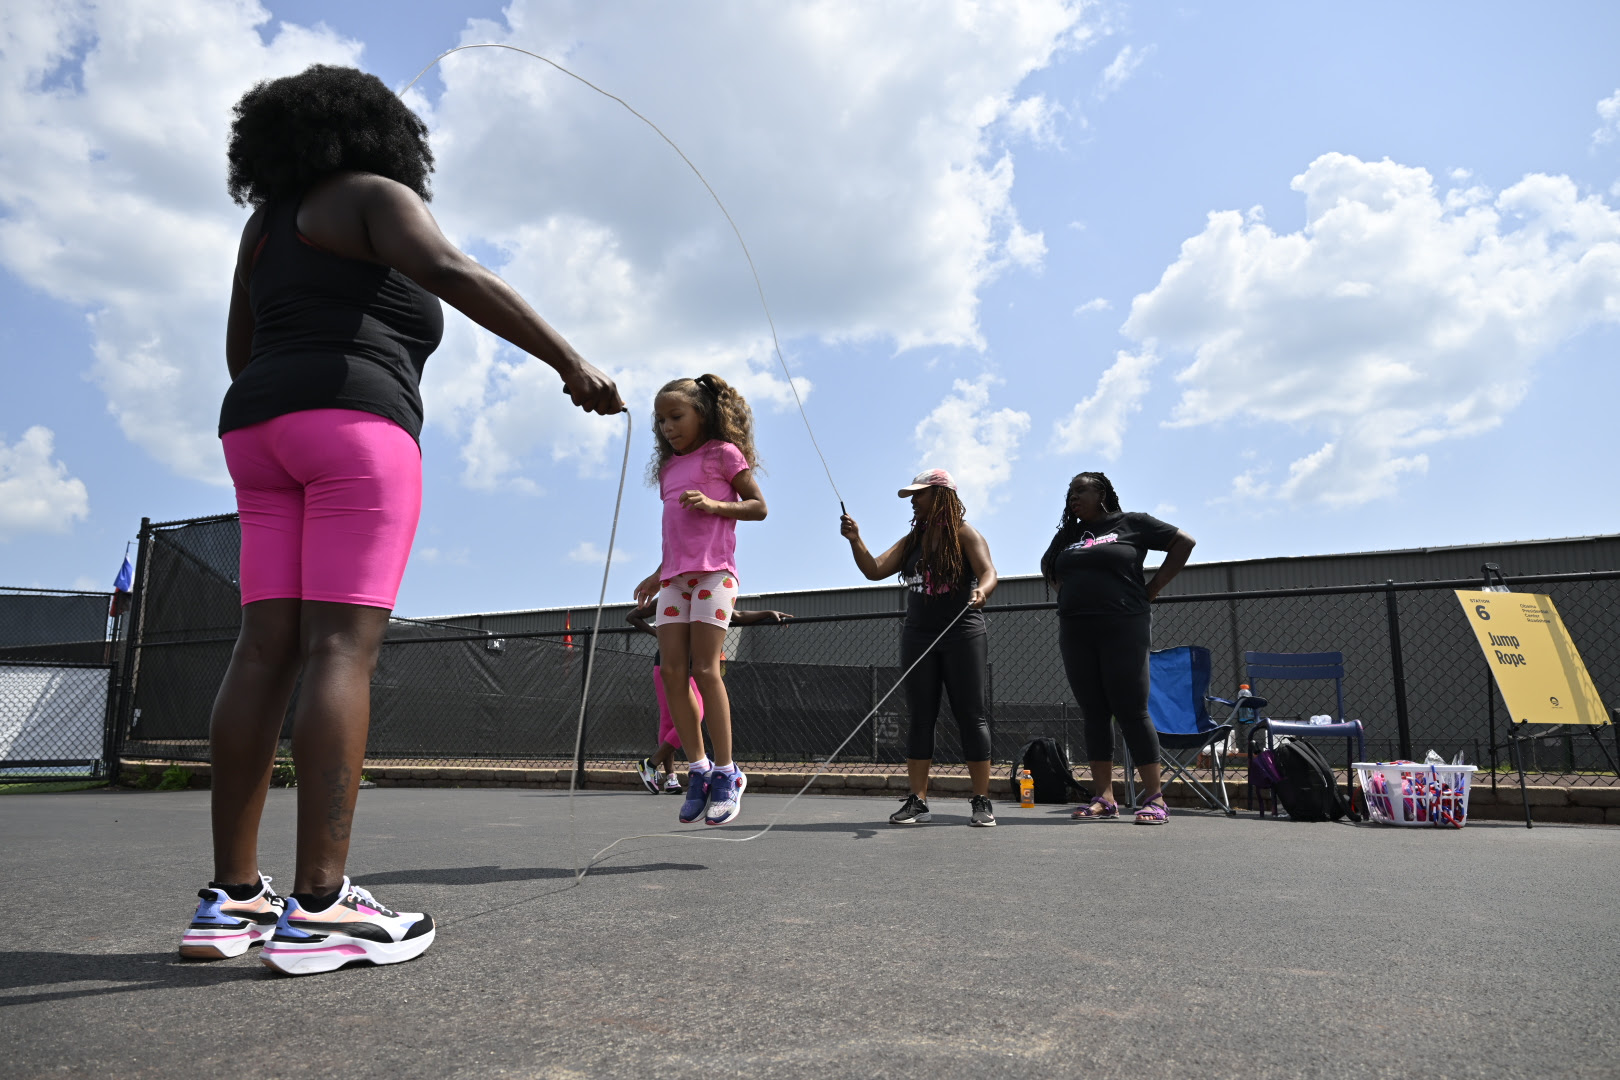 Four people with medium to dark skintones and playing double dutch outside on asphalt.